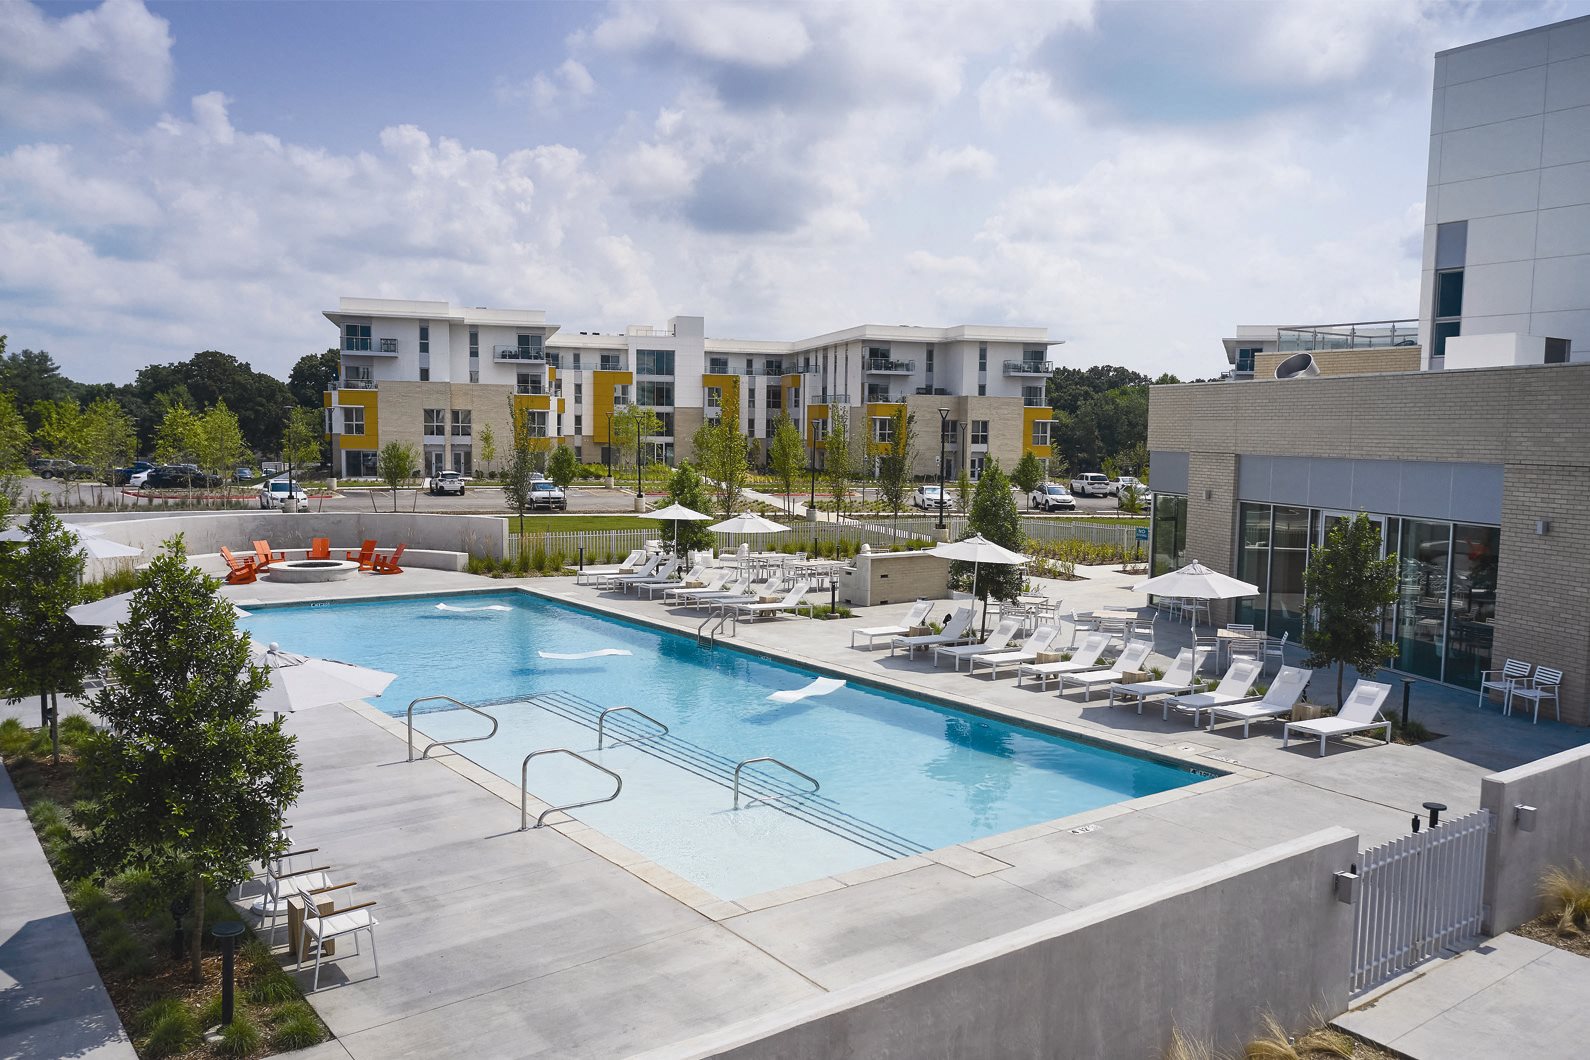 Sparkling pool and sundeck at Crystal Flats in Bentonville, AR